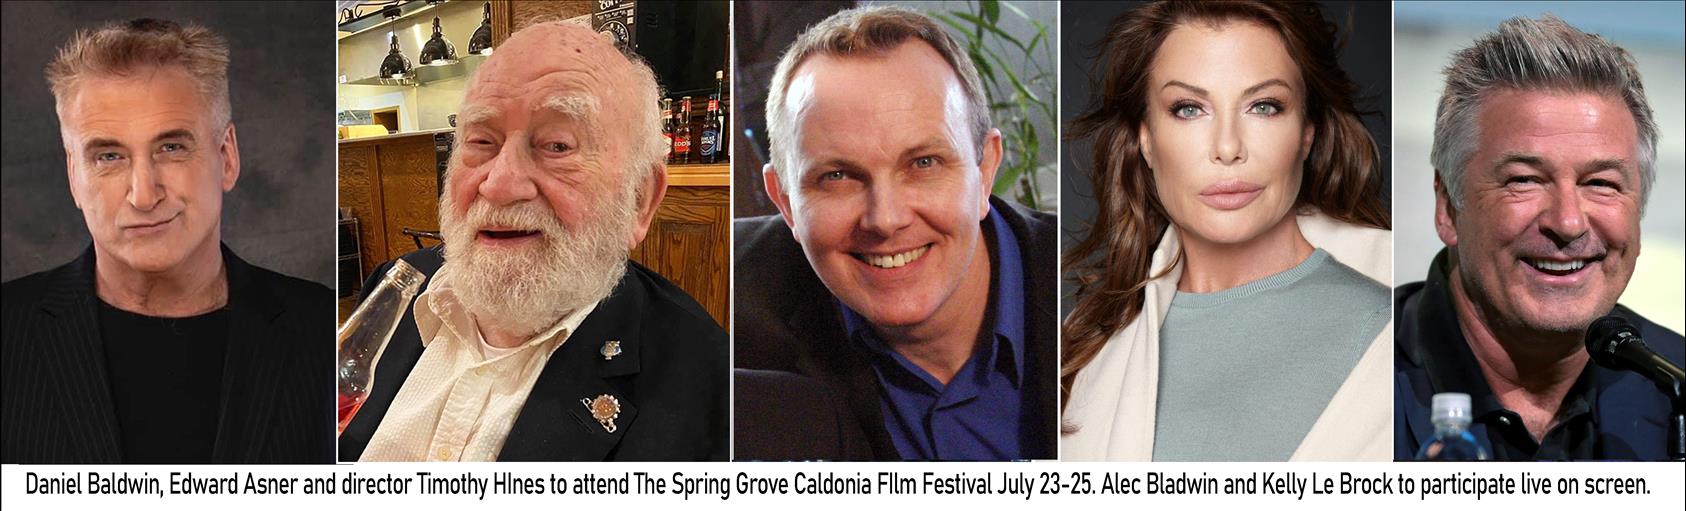 Daniel Baldwin, Ed Asner and Timothy Hines to Attend Spring-Grove Caledonia Film Festival, Alec Baldwin, Kelly Le Brock to Join Live on Screen